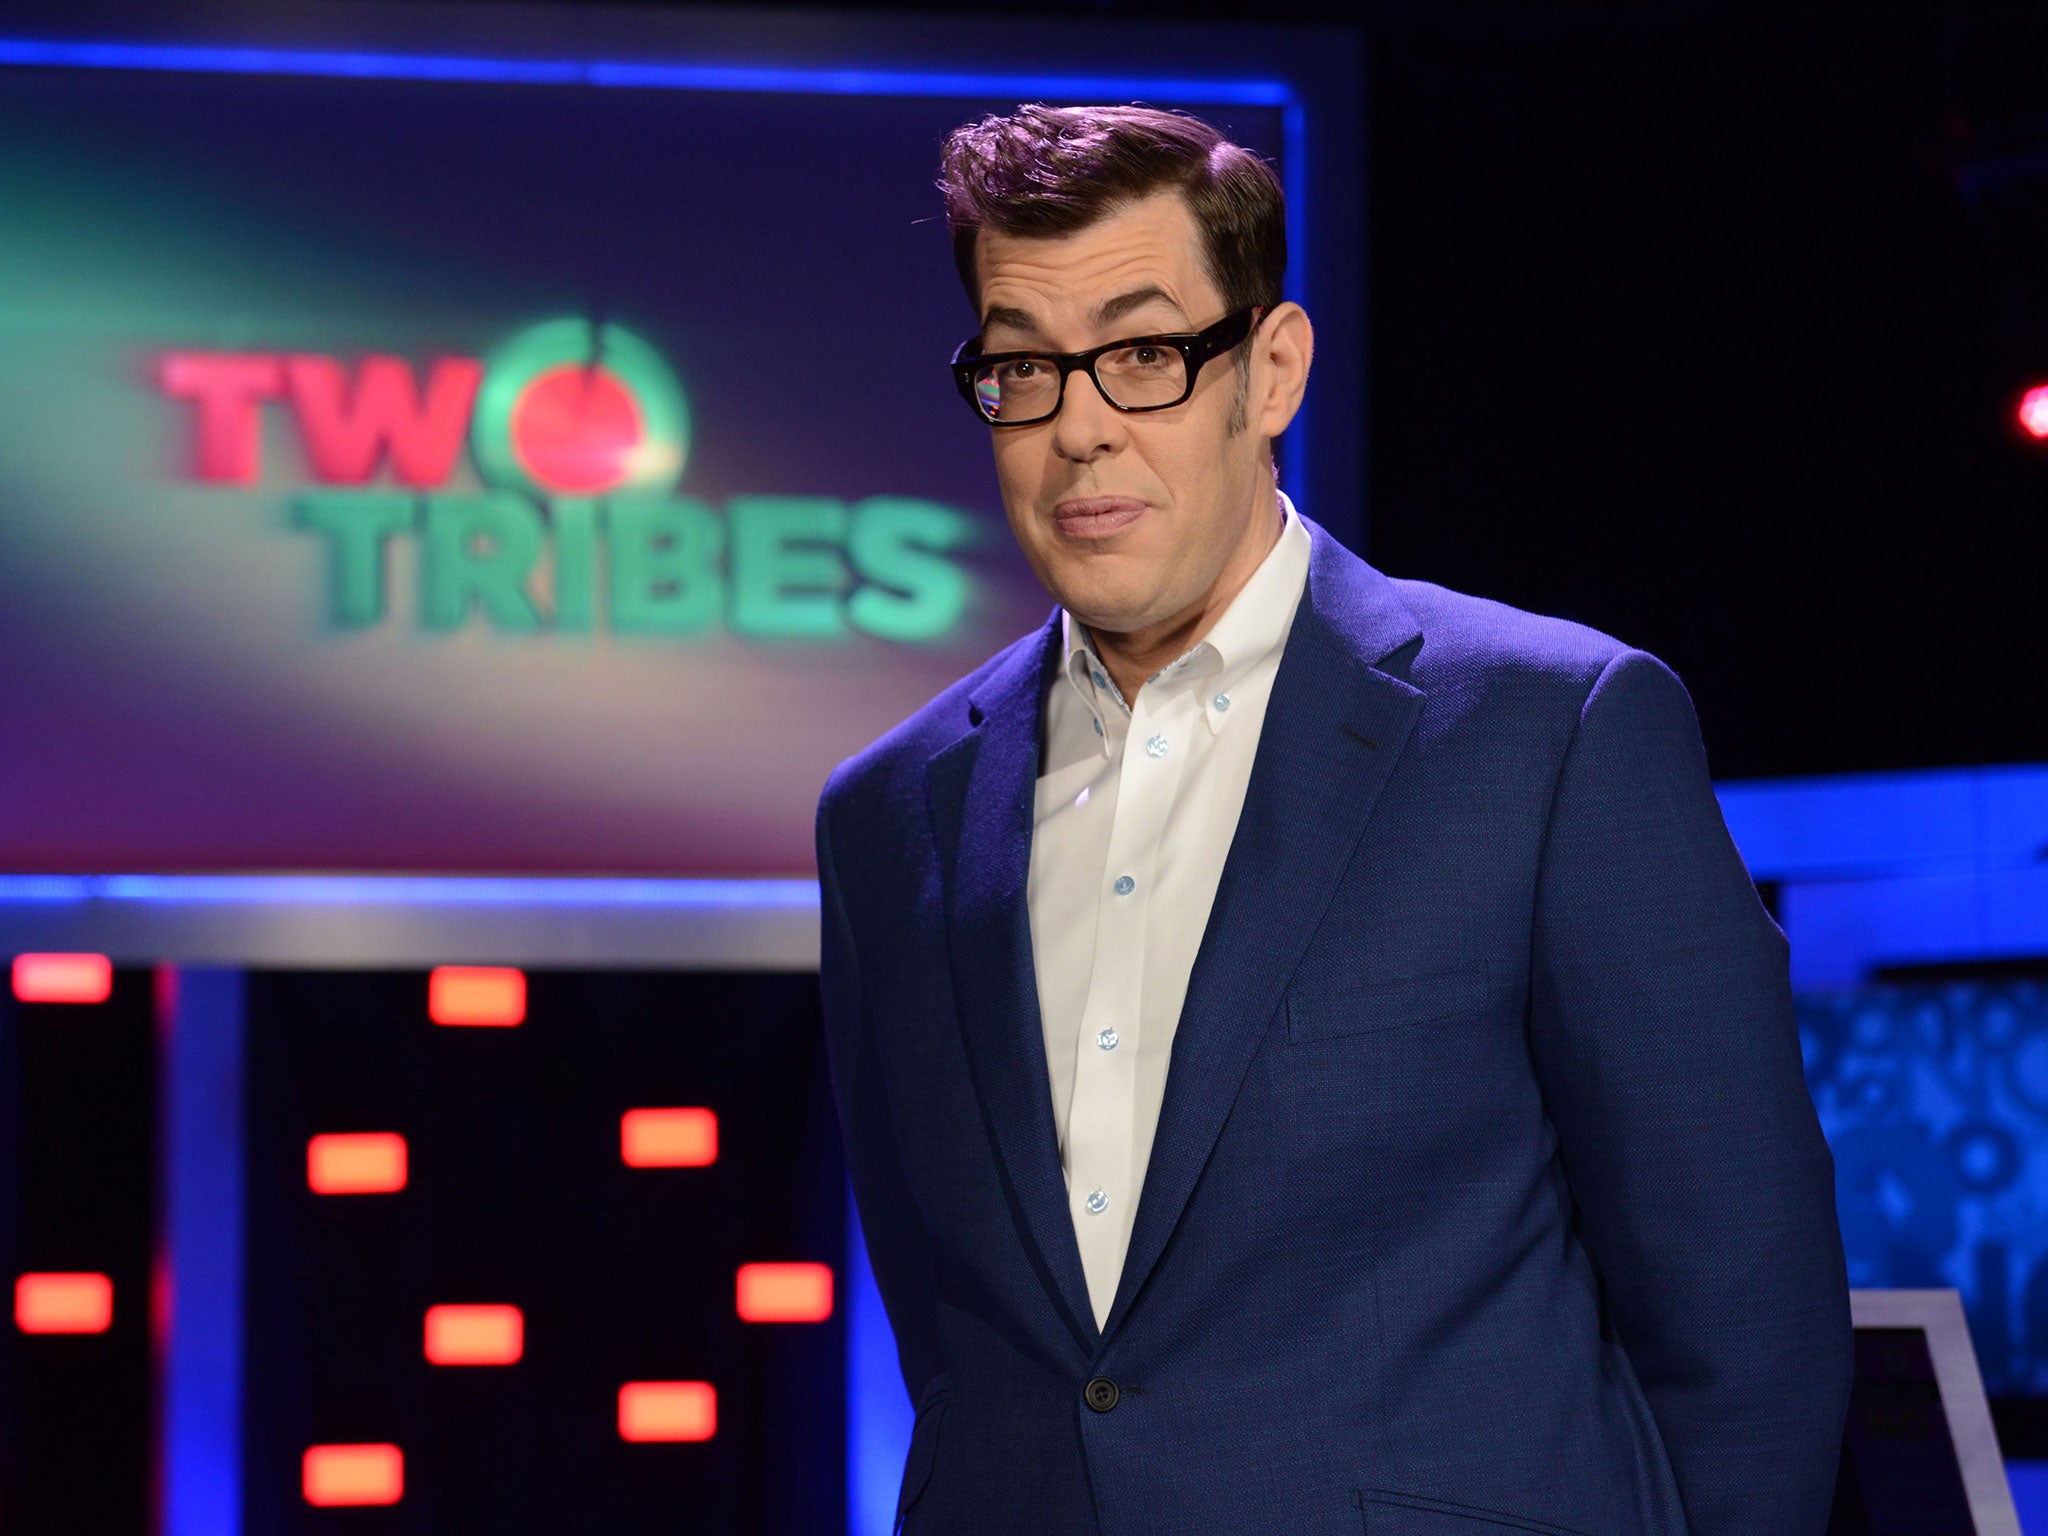 Questionable: Richard Osman, host of ‘Two Tribes’